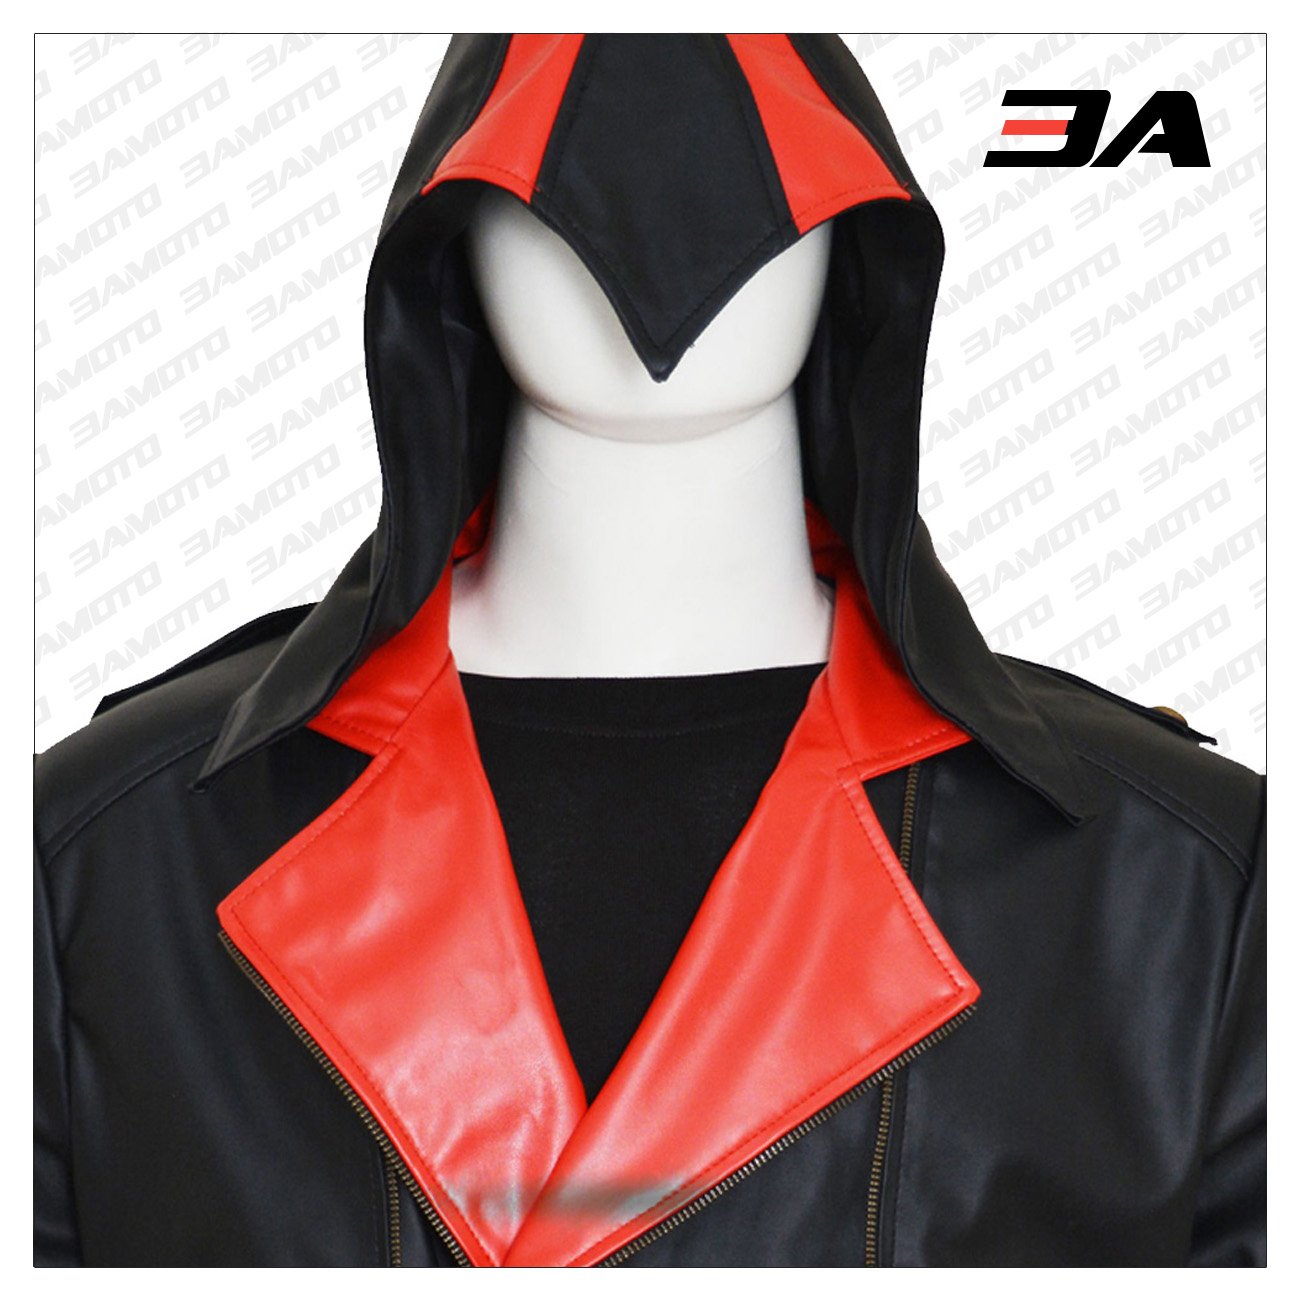 US$ 143.91 - Assassin Creed Kenway Jacket Coat Cosplay Costume Cotton-Linen  Tailor-Made[G1585] - www.fondcosplay.com